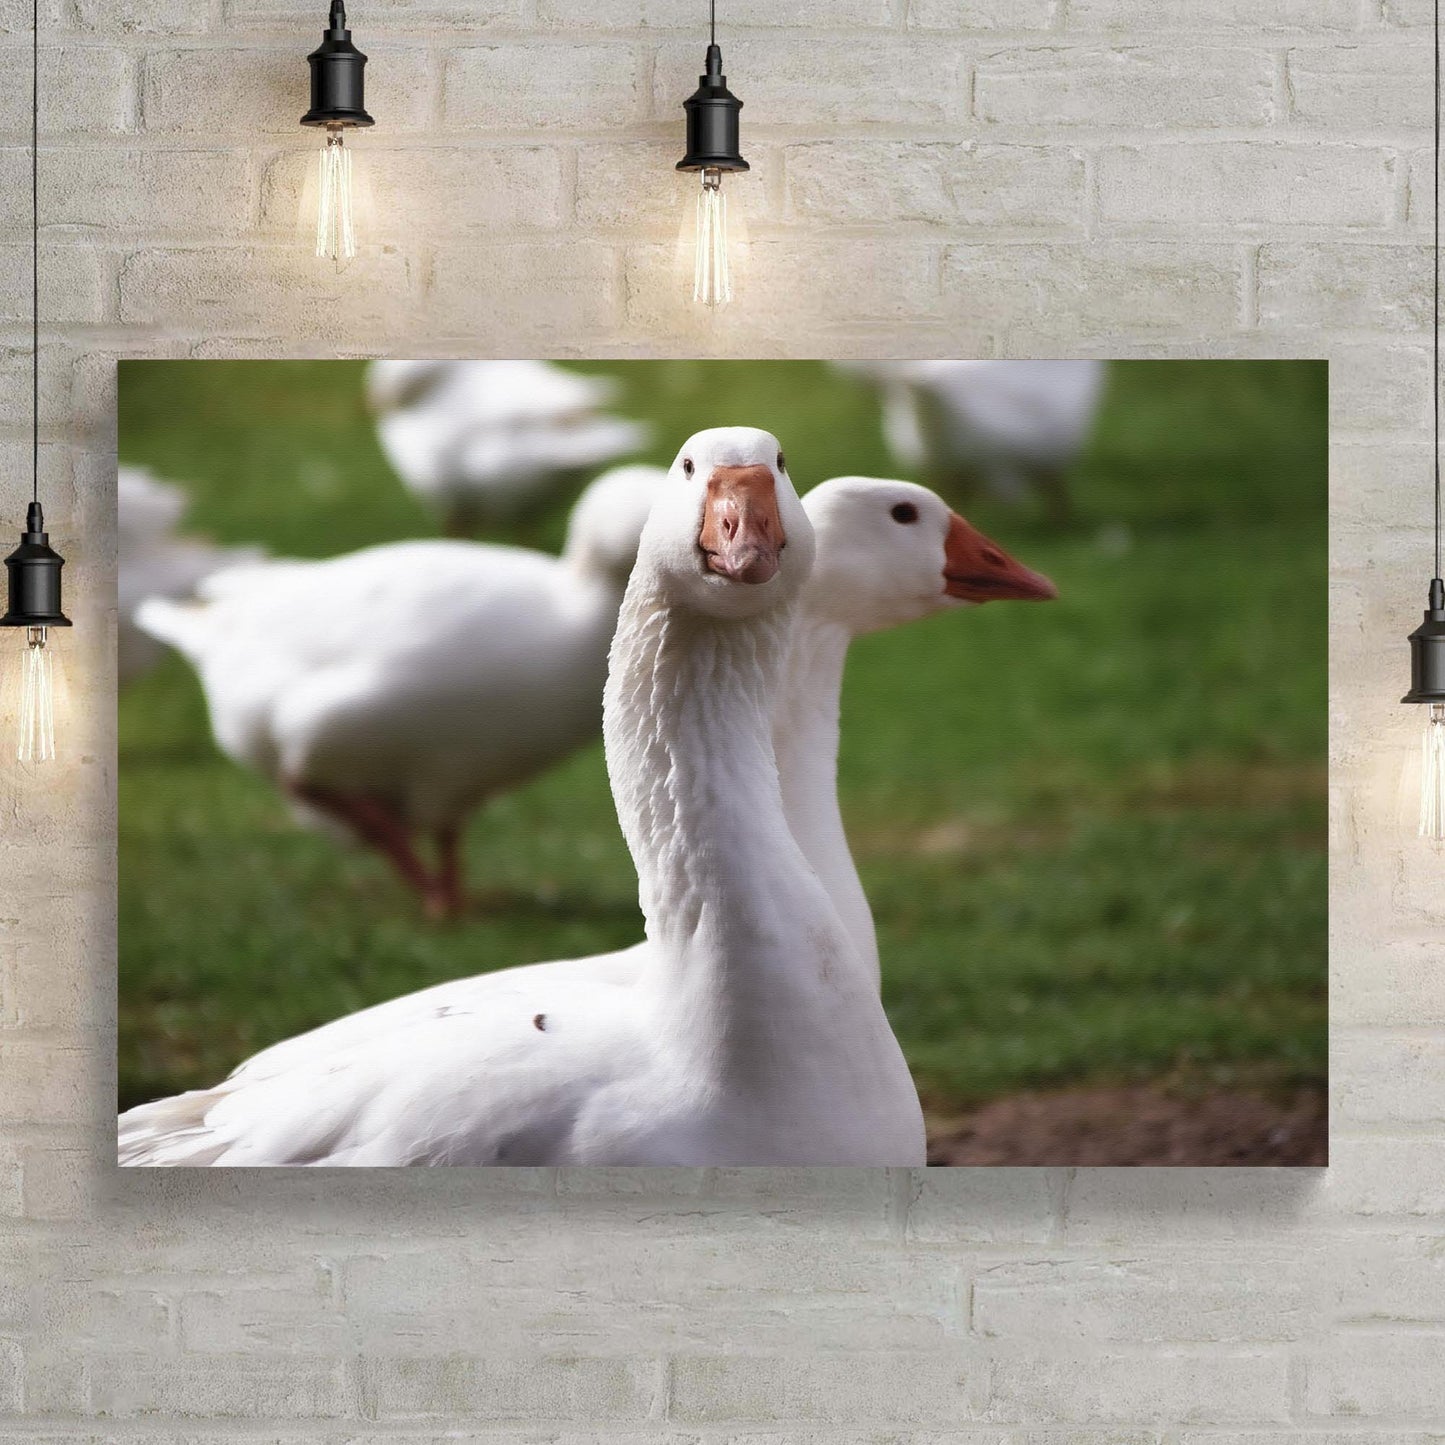 Curious Geese Canvas Wall Art - Image by Tailored Canvases